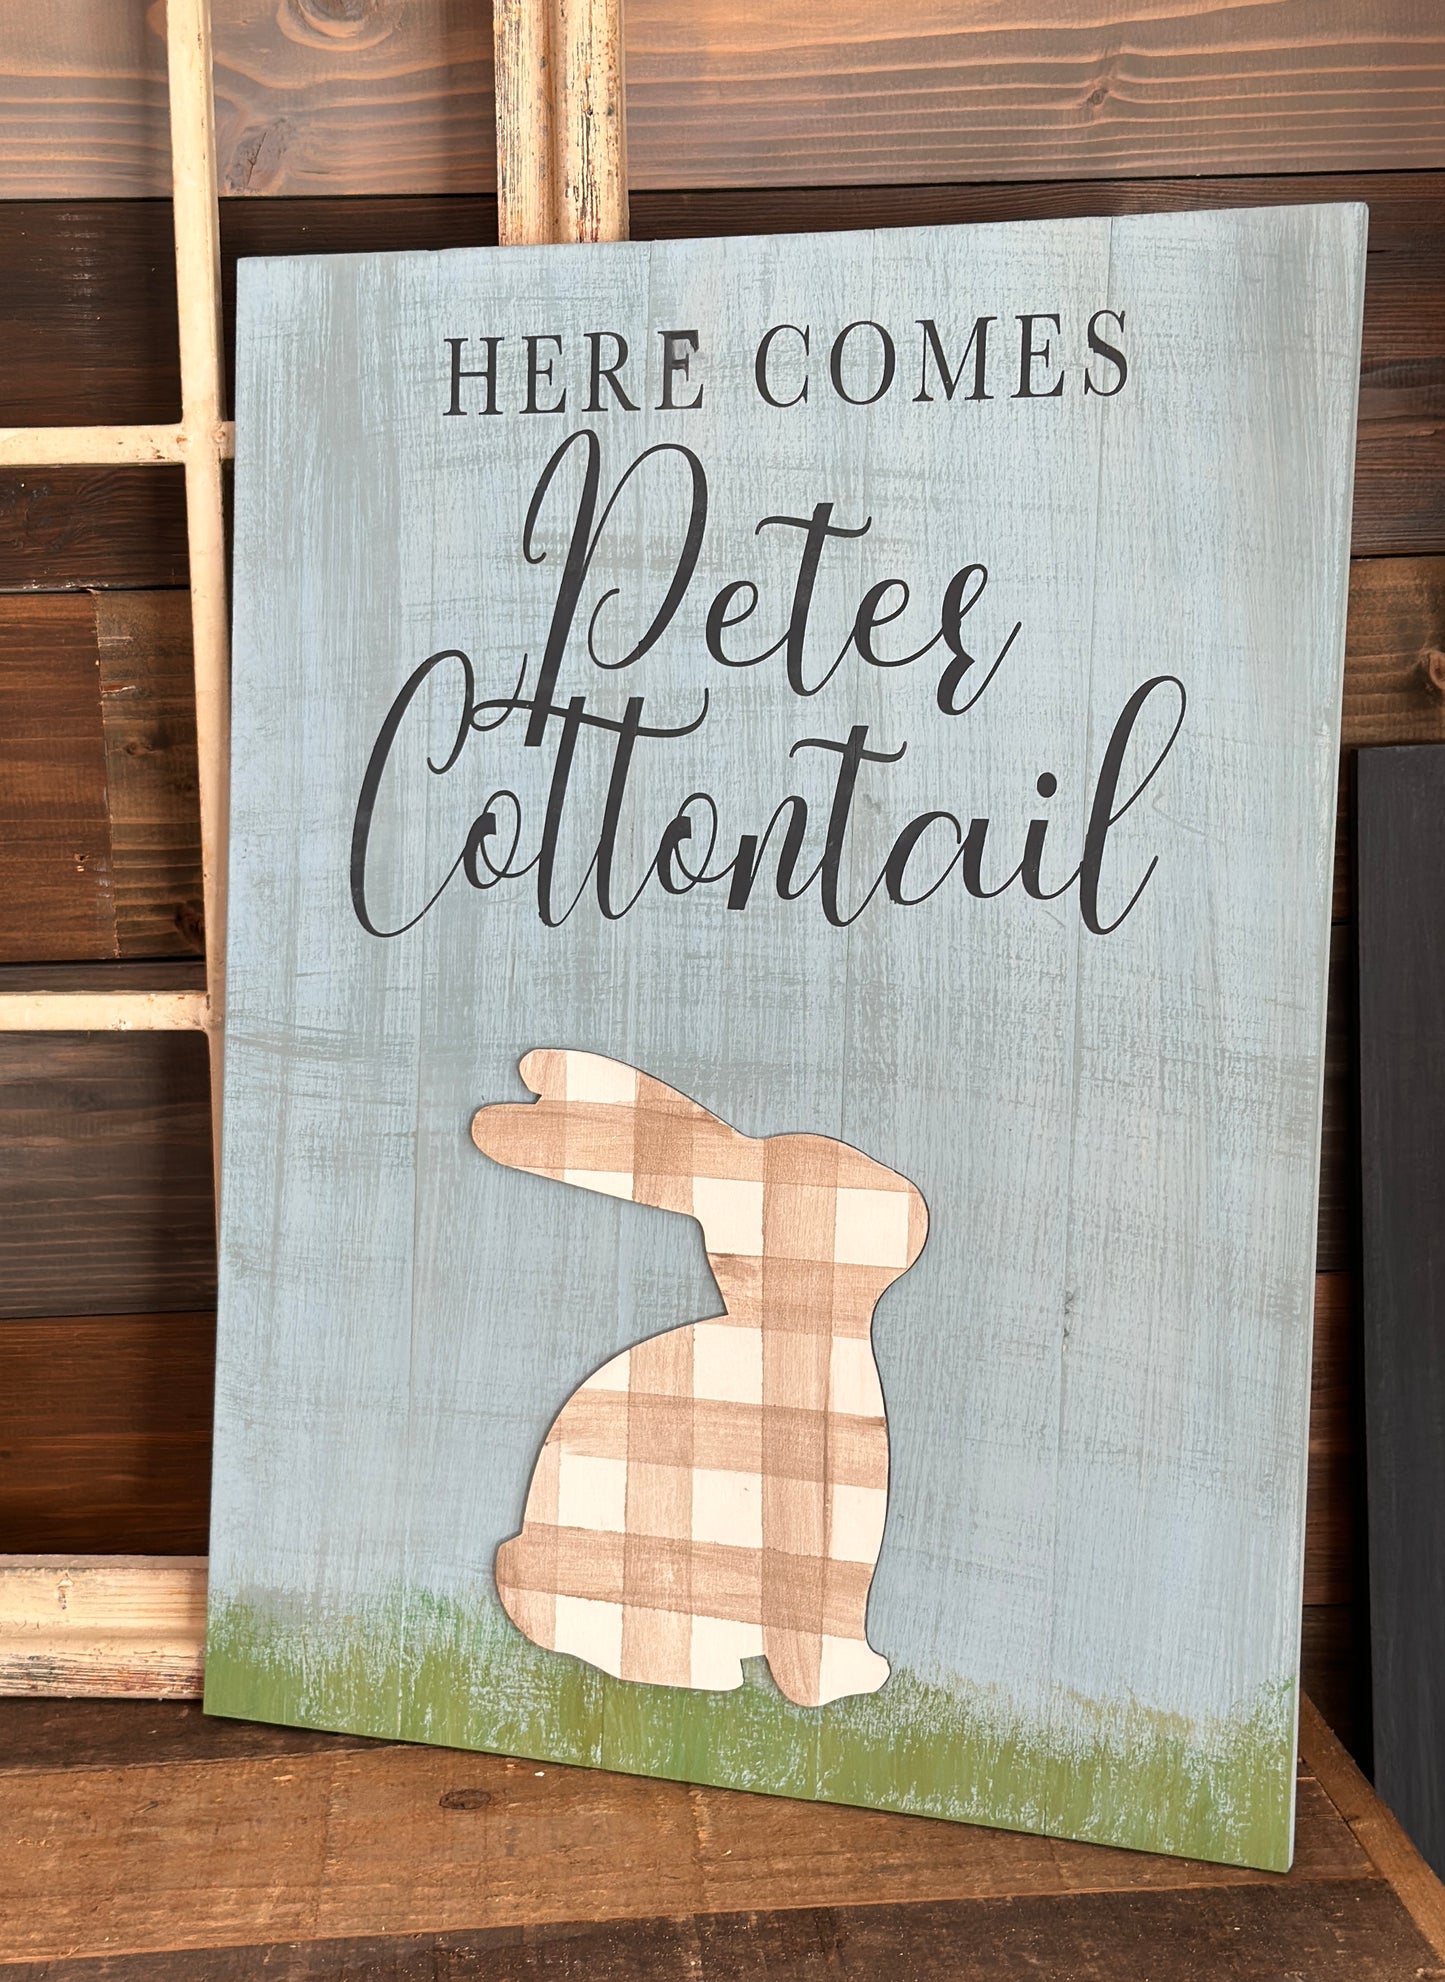 Here Comes Peter Cottontail: Rectangle A1827N